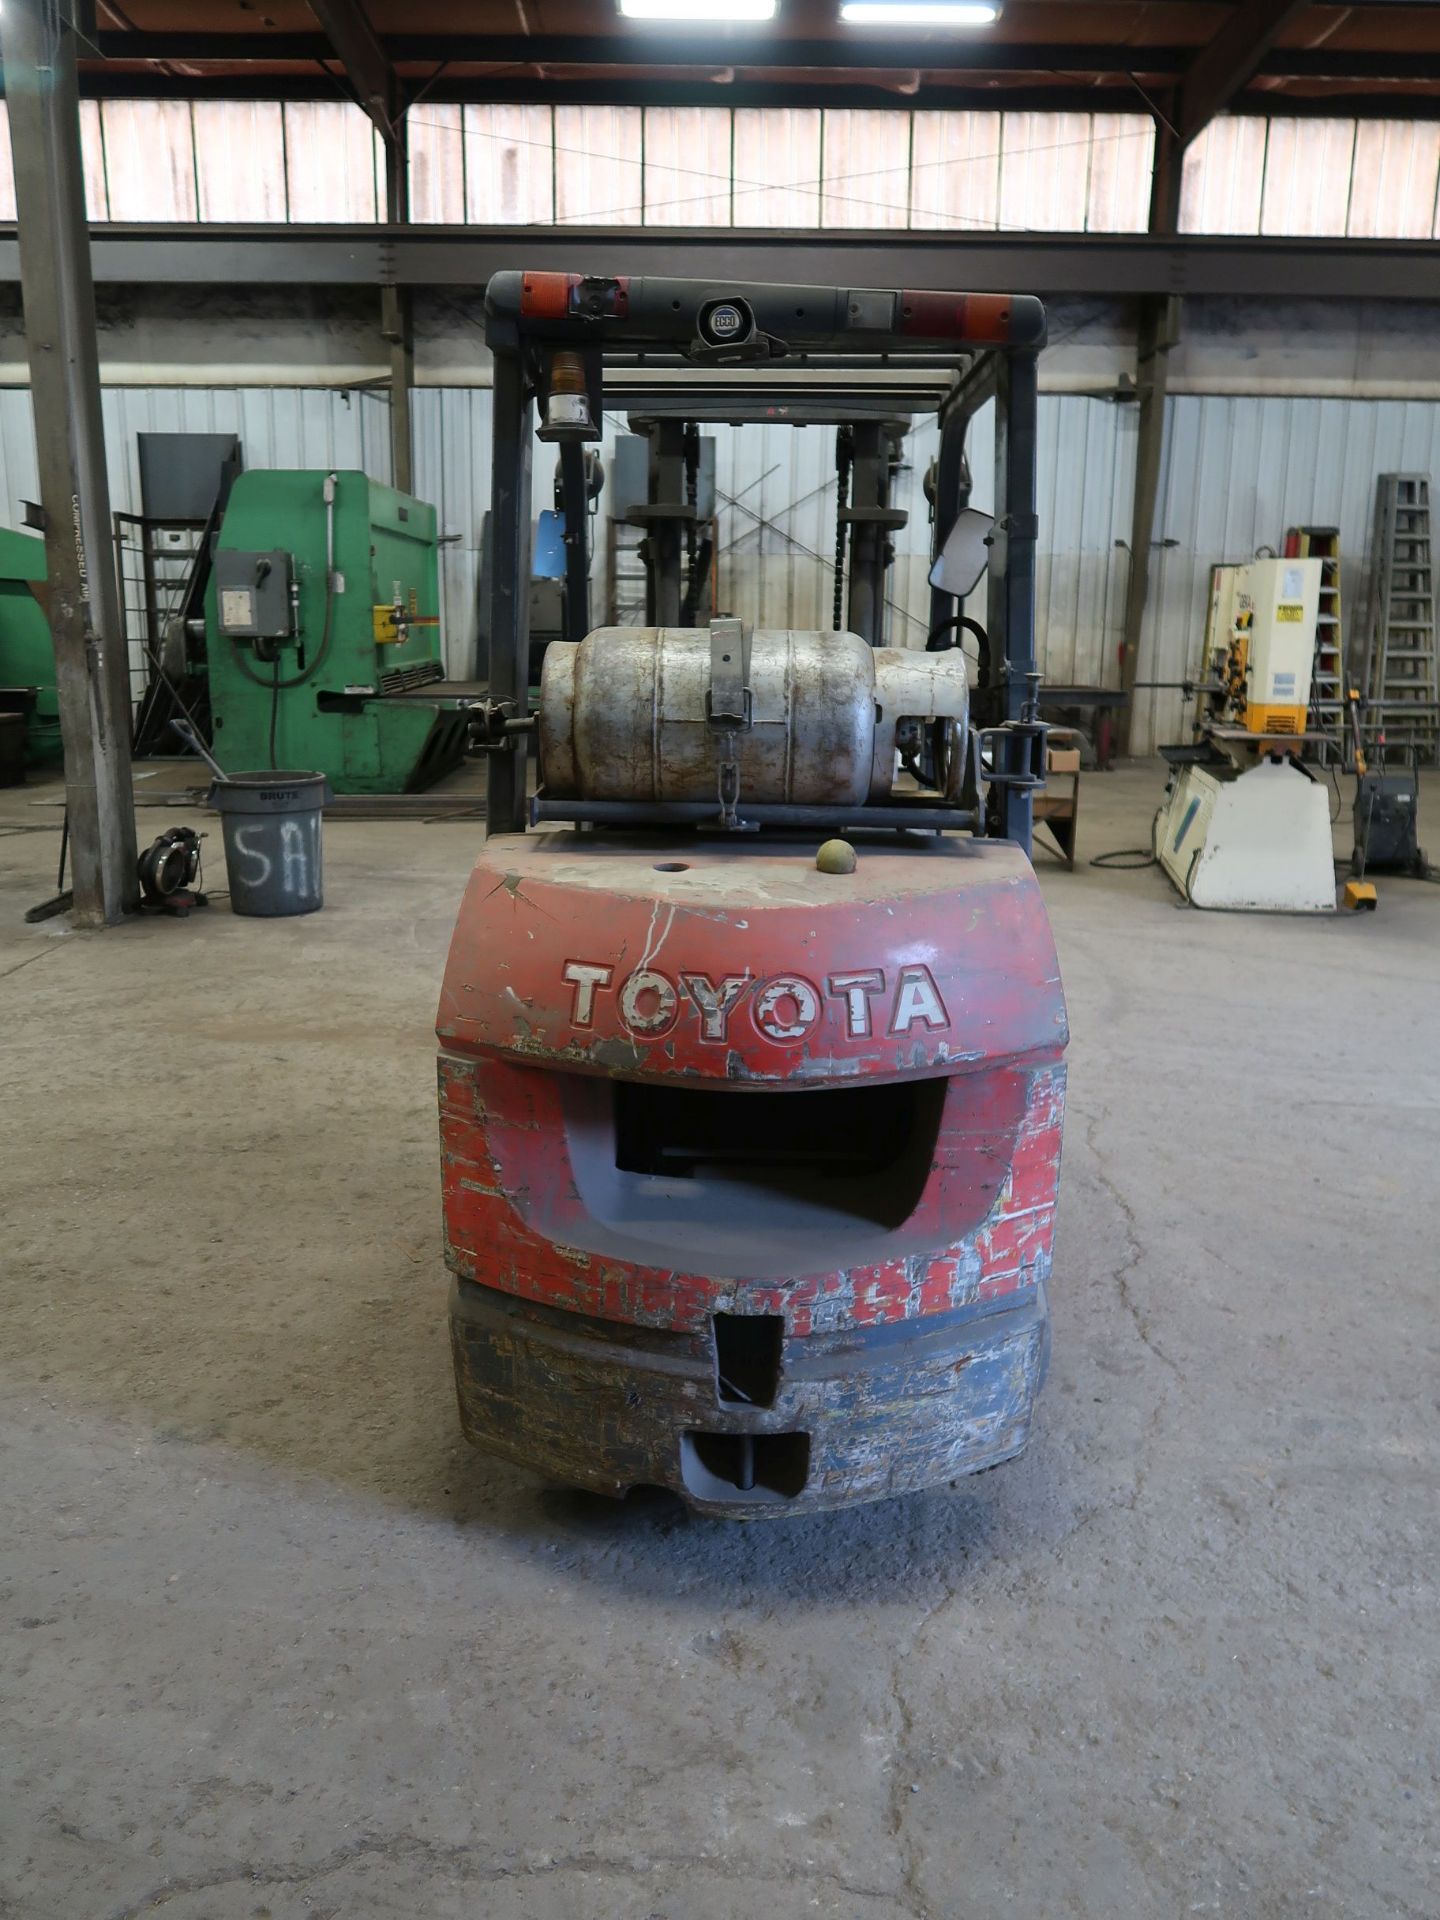 6,500 LB. TOYOTA MODEL 7FGCU32 SOLID TIRE LP GAS LIFT TRUCK; S/N 67222, 2-STAGE MAST, 82" MAST - Image 5 of 10